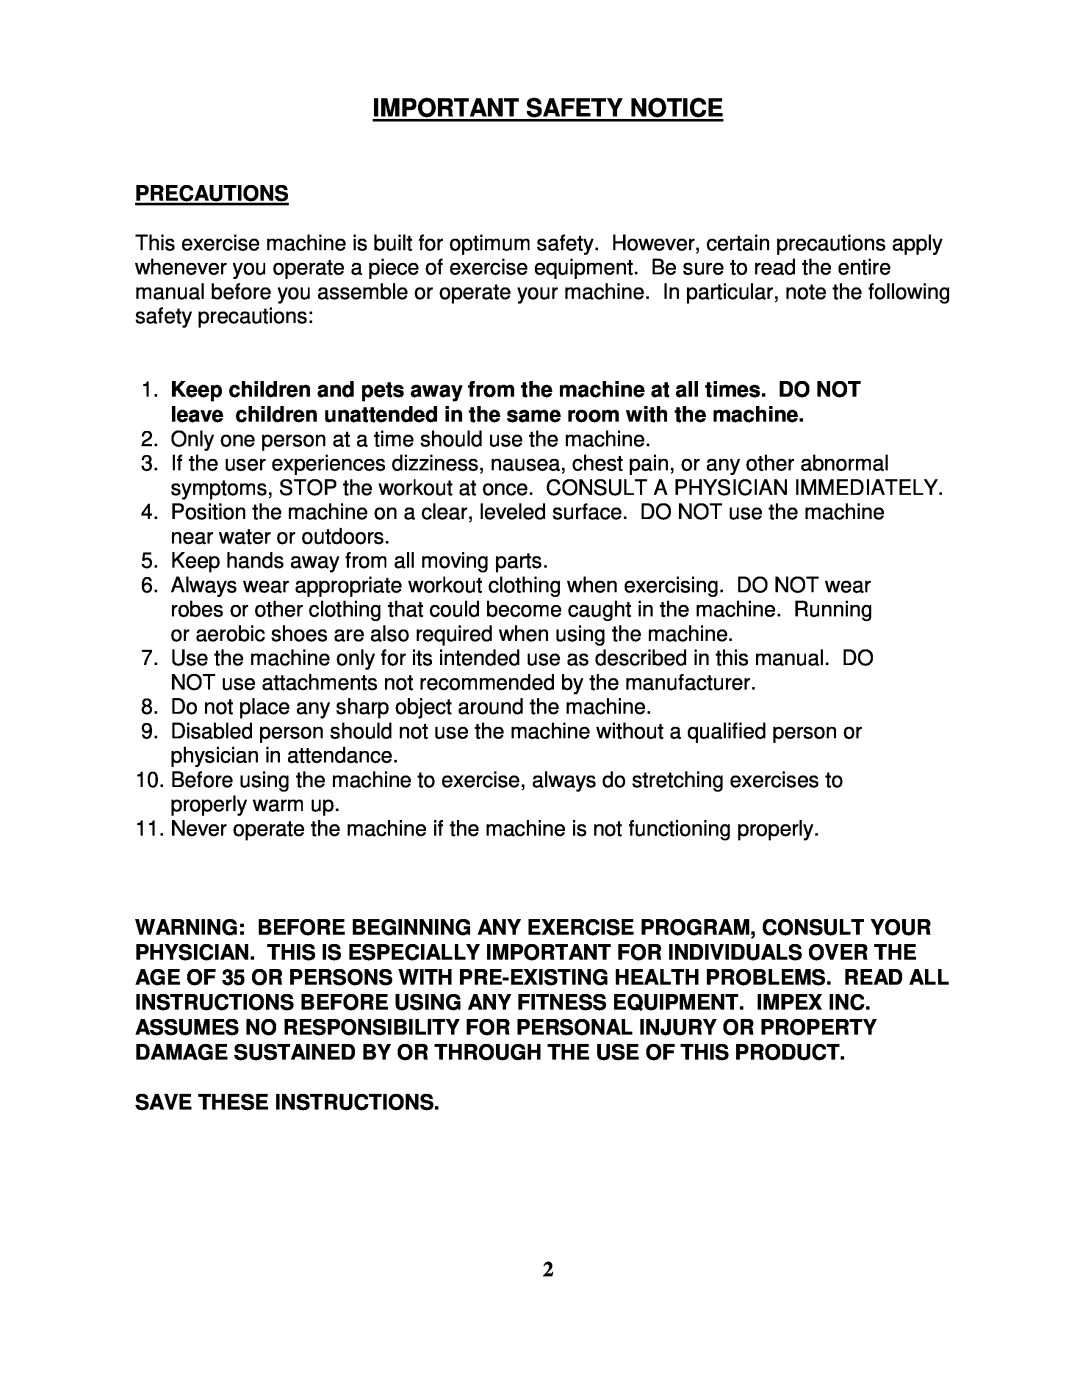 Impex MACH V manual Important Safety Notice, Precautions, Save These Instructions 